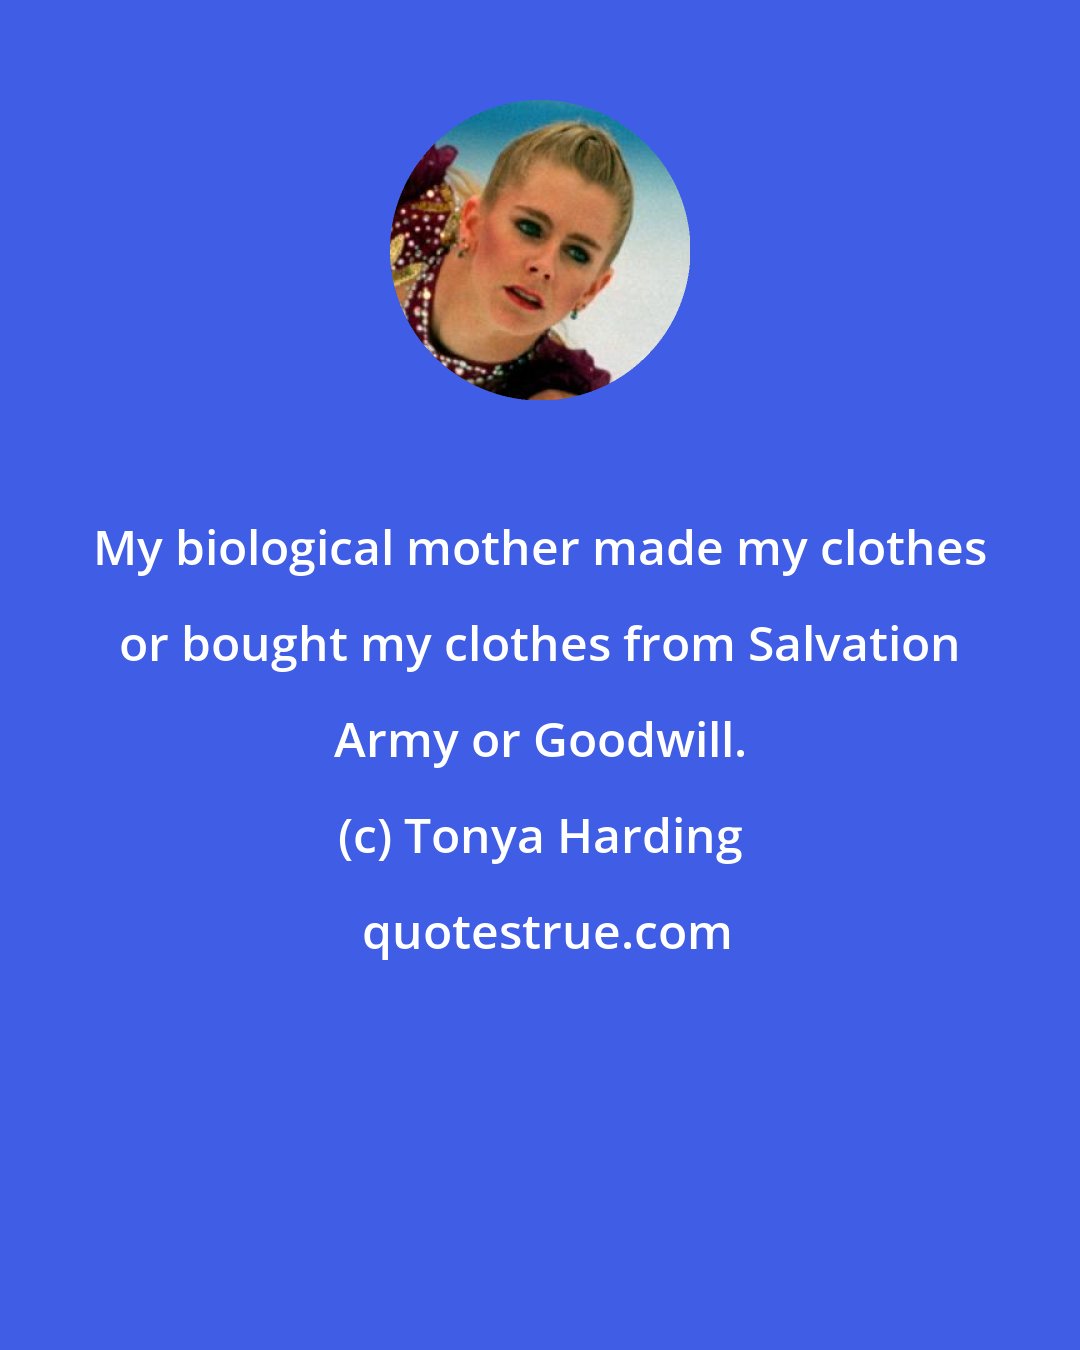 Tonya Harding: My biological mother made my clothes or bought my clothes from Salvation Army or Goodwill.